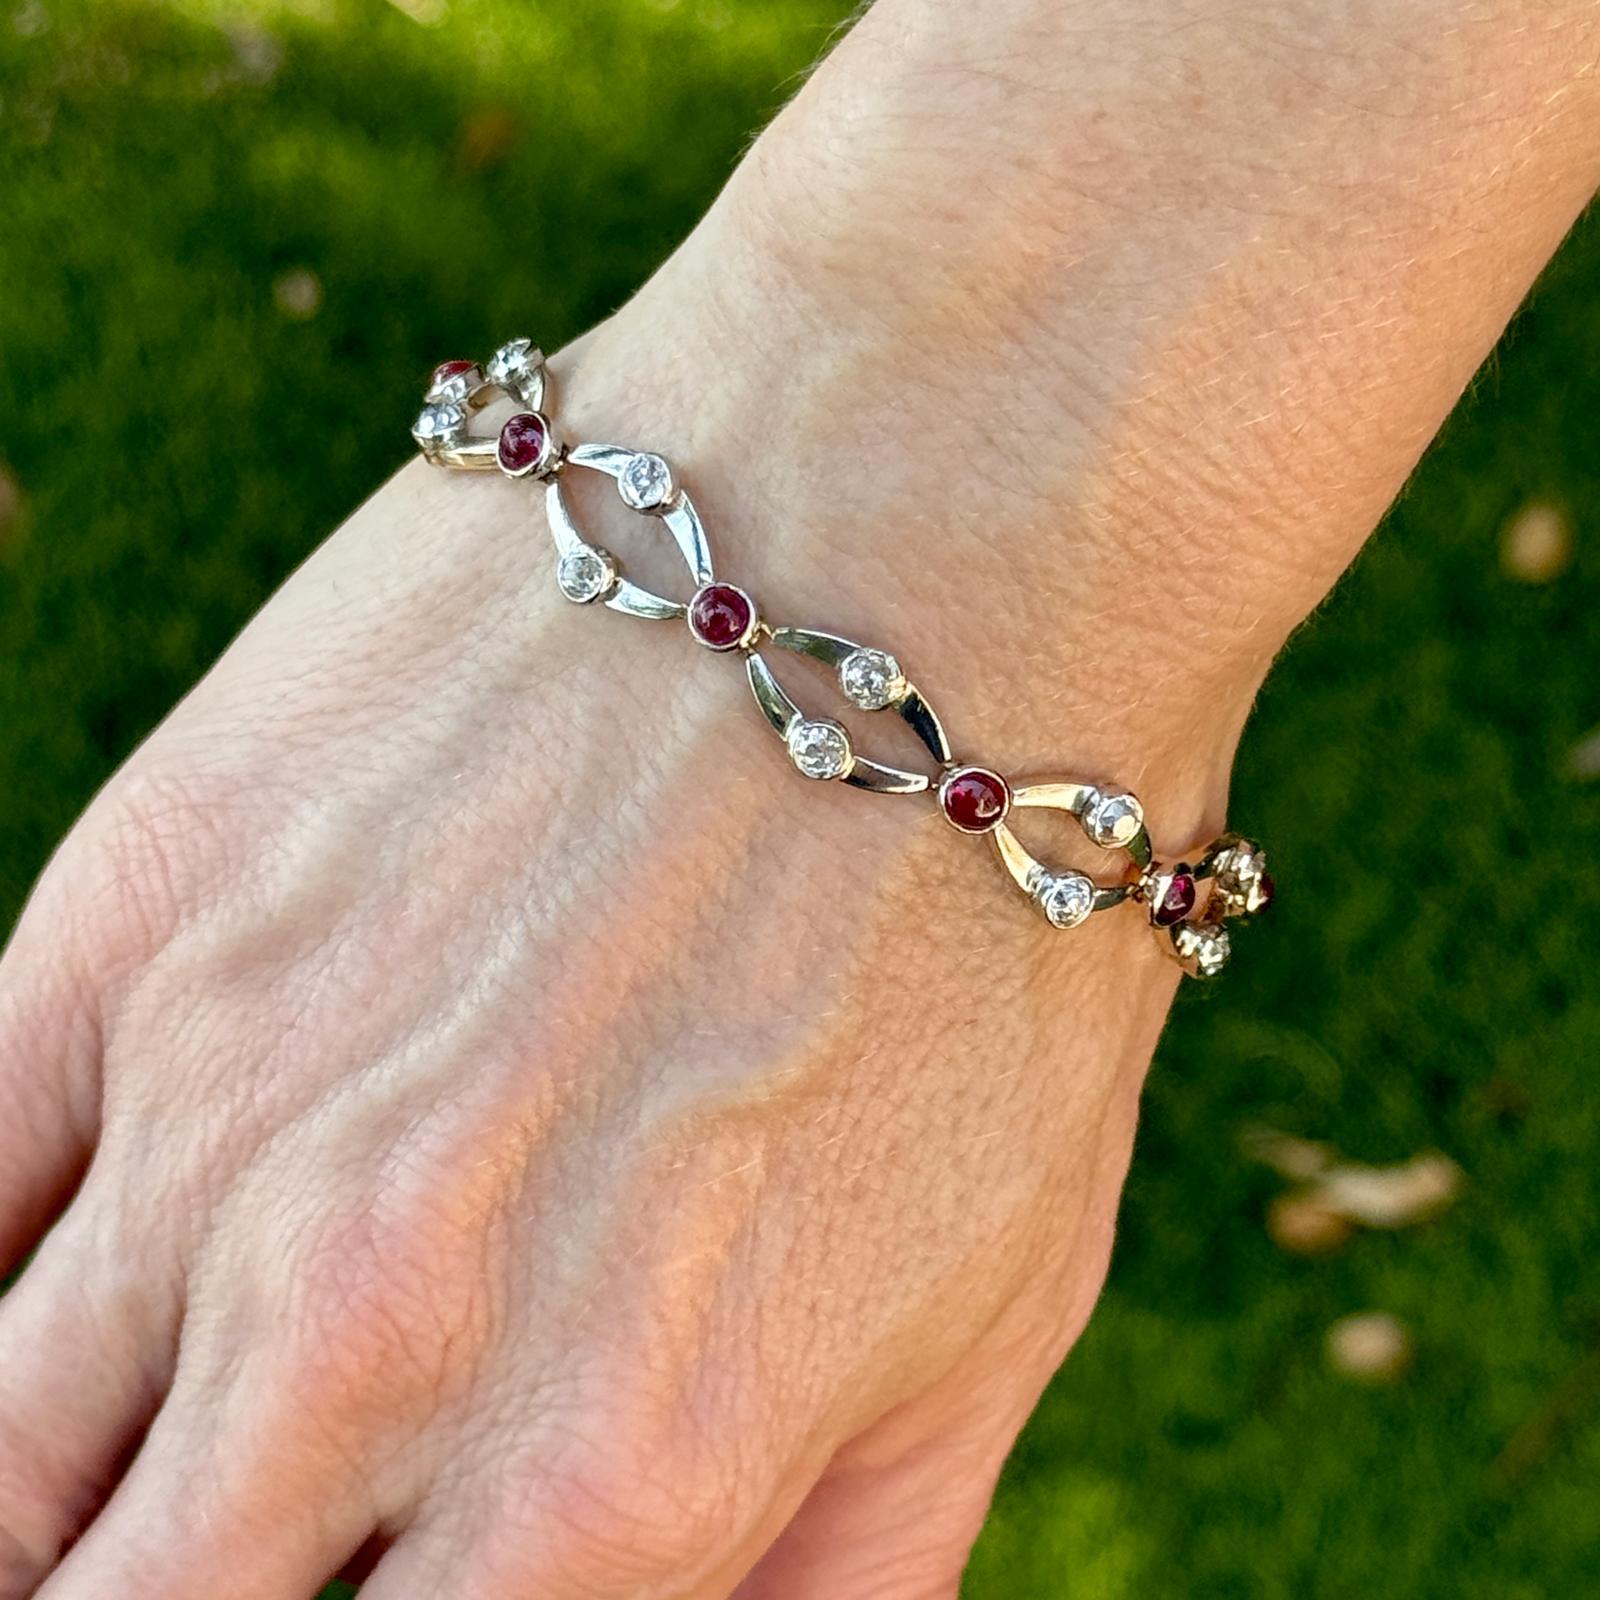 The Art Deco diamond ruby two-tone gold link bracelet is a stunning piece of jewelry that perfectly captures the glamour and sophistication of the Art Deco era. The bracelet features a captivating array of old mine cut diamonds and cabochon rubies,